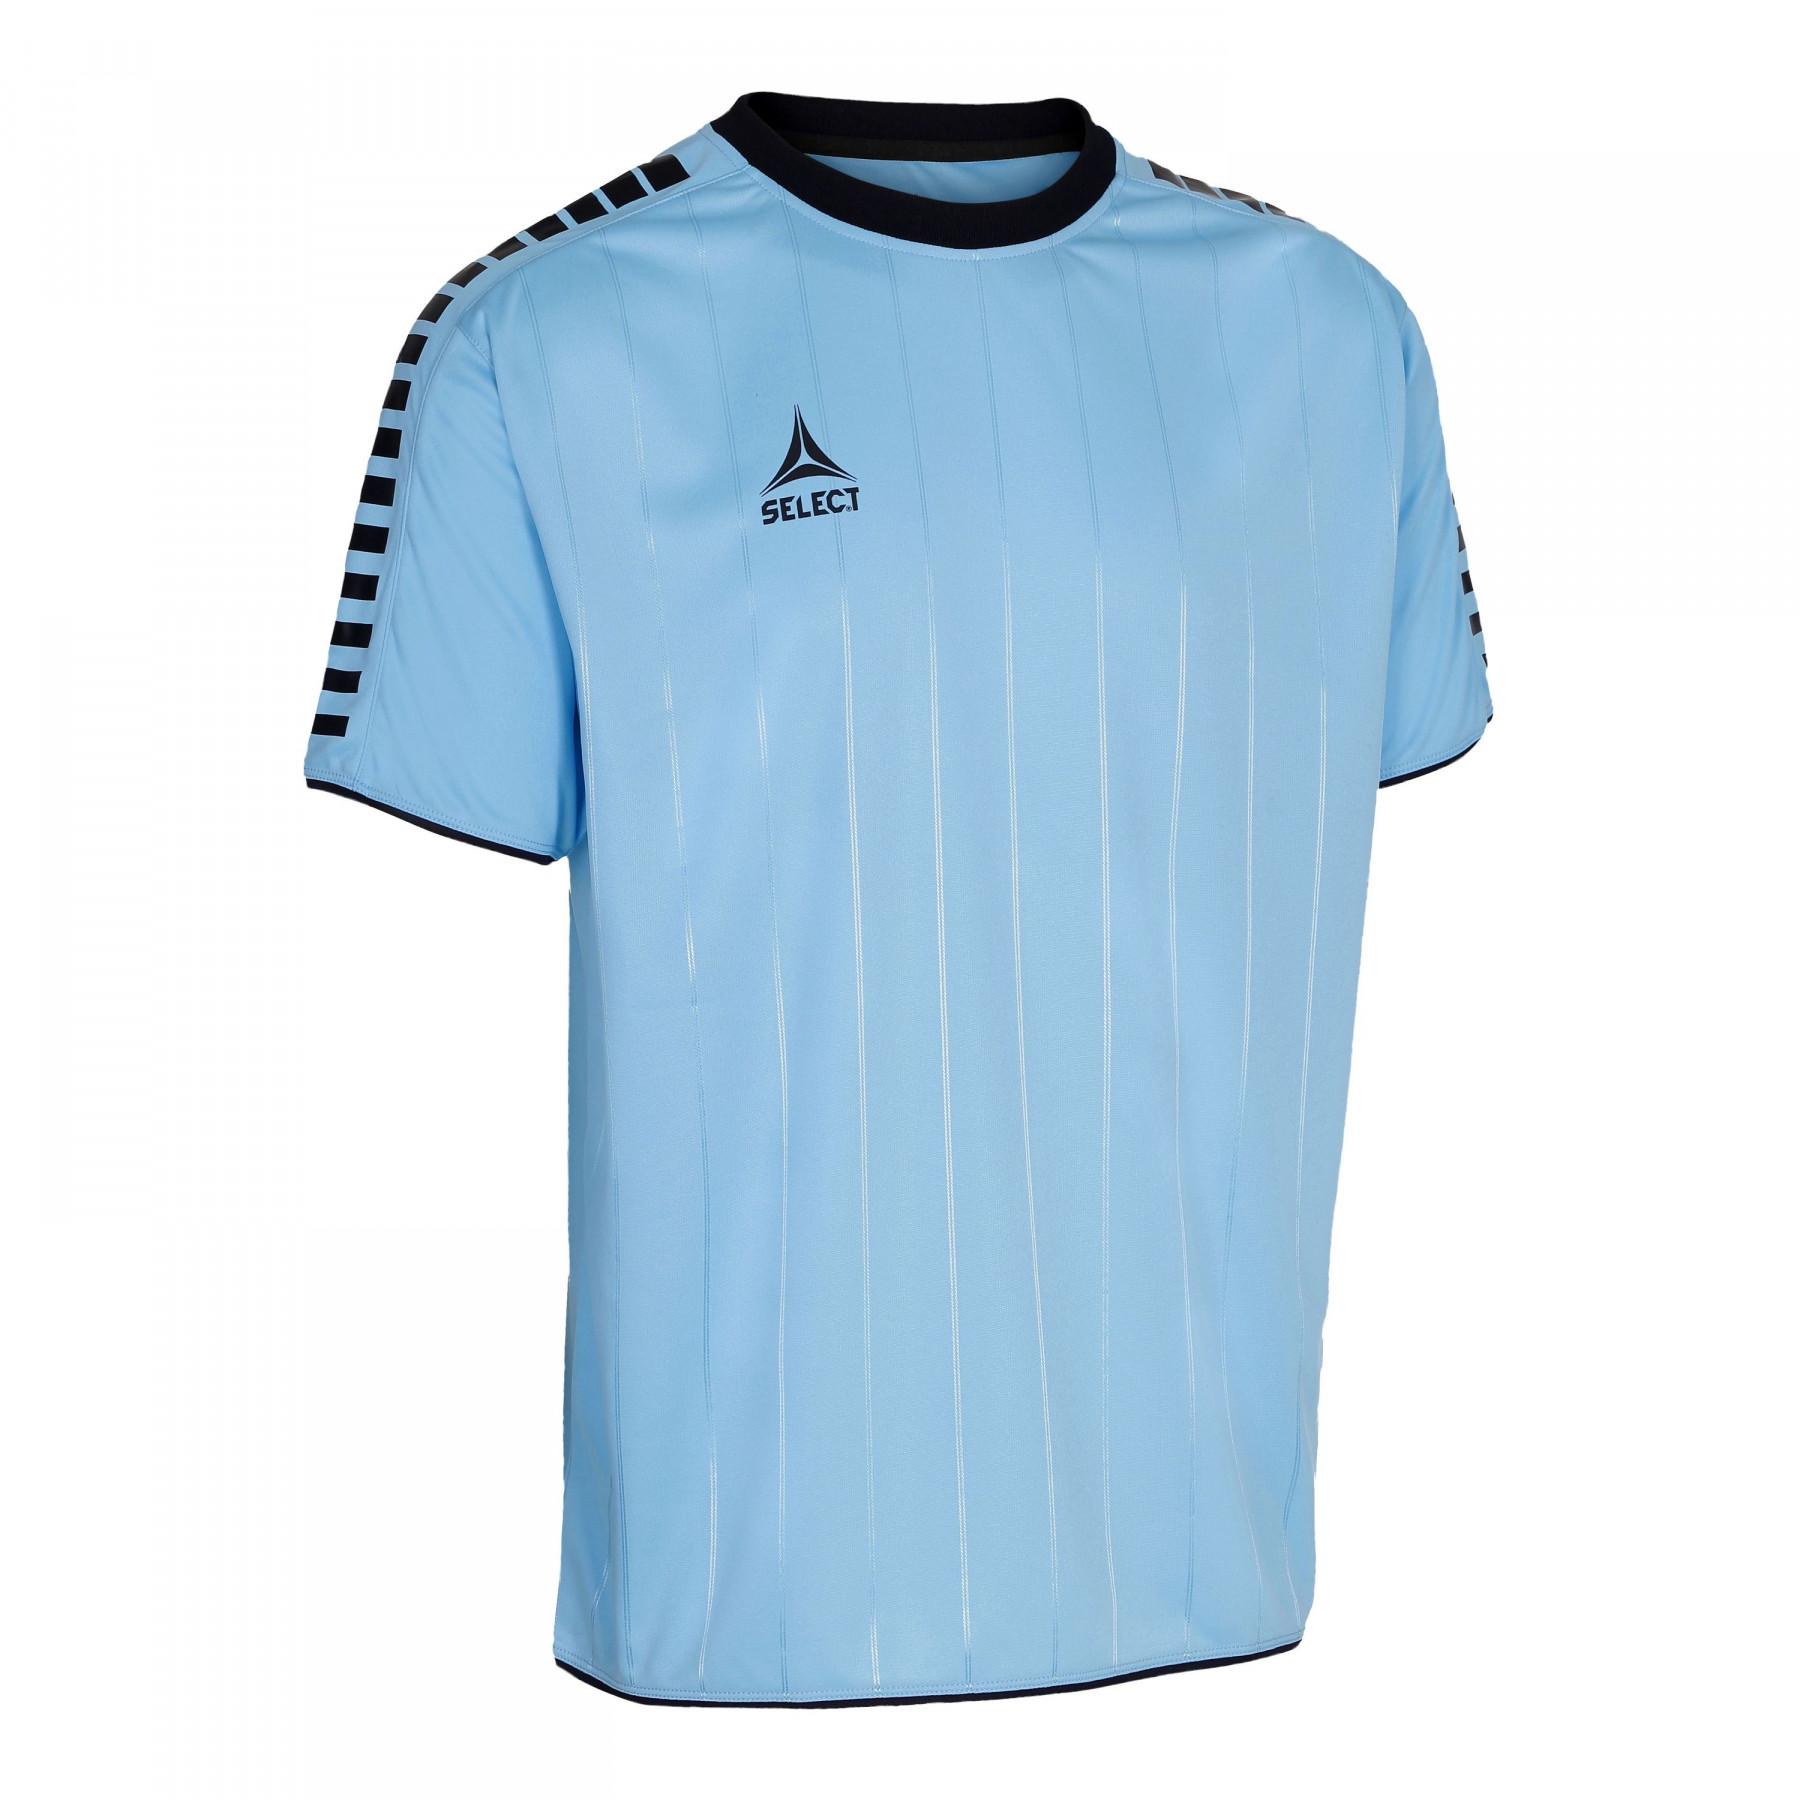 Jersey Select Argentina